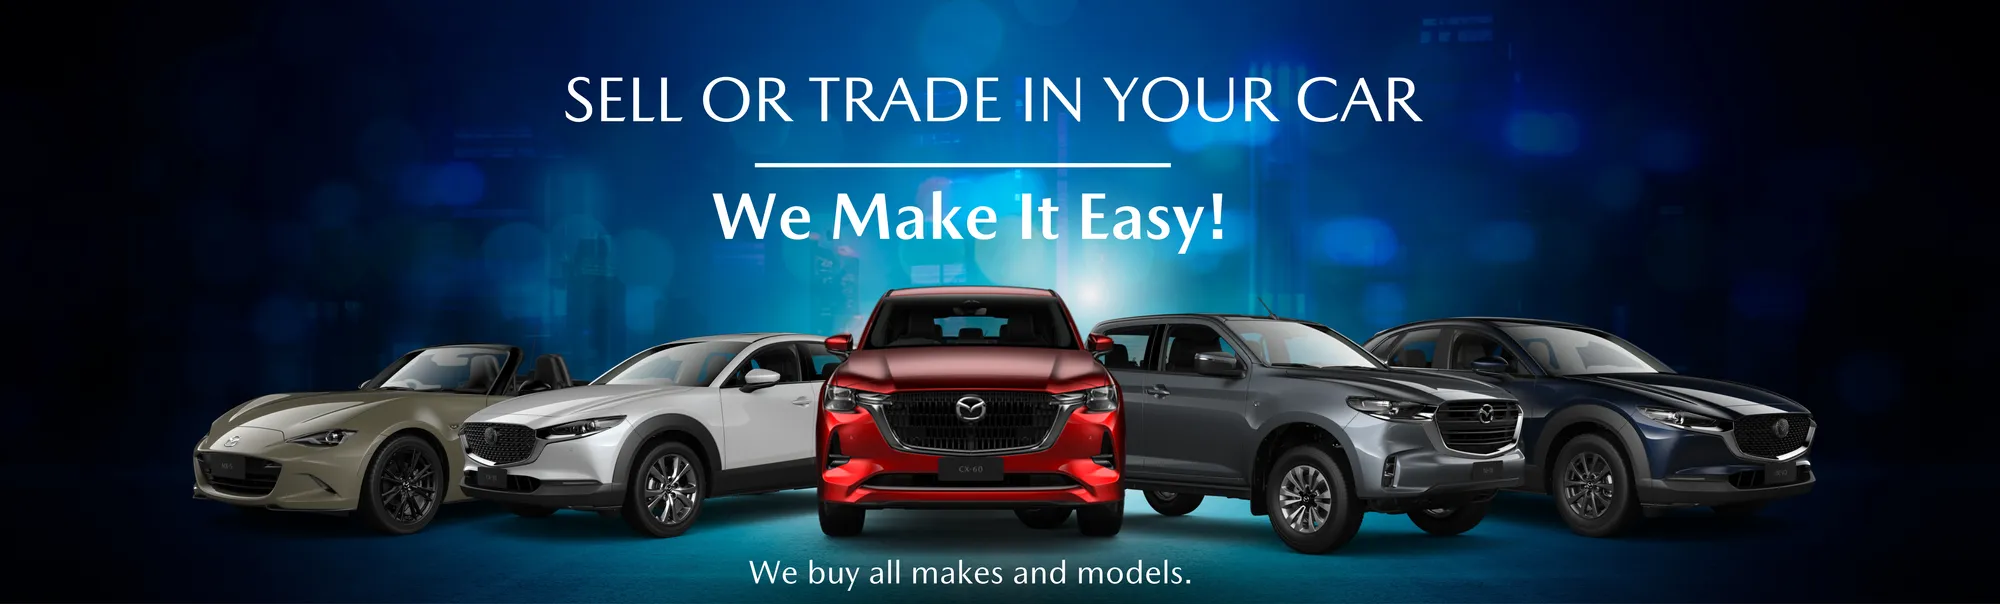 SELL_YOUR_CAR